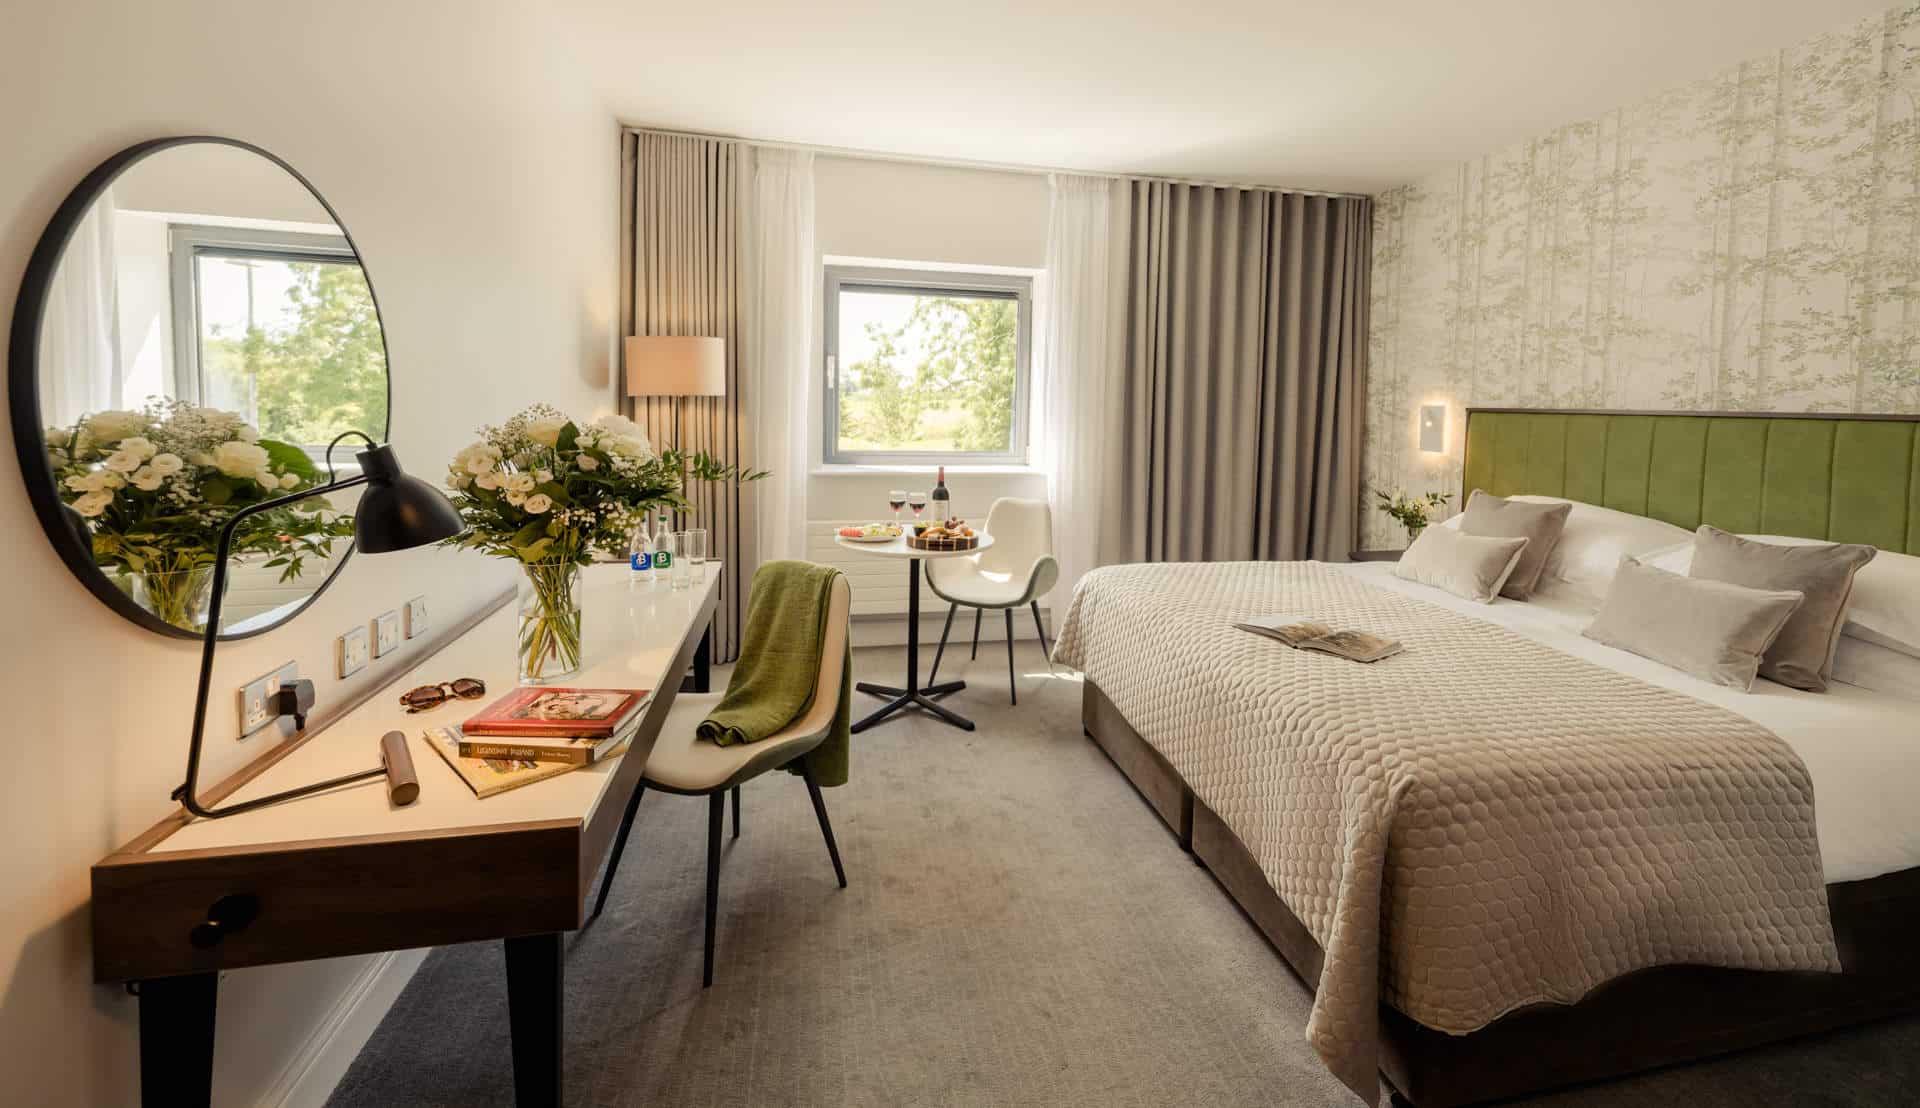 Deluxe Double Room with wine at The Hoban Hotel Kilkenny